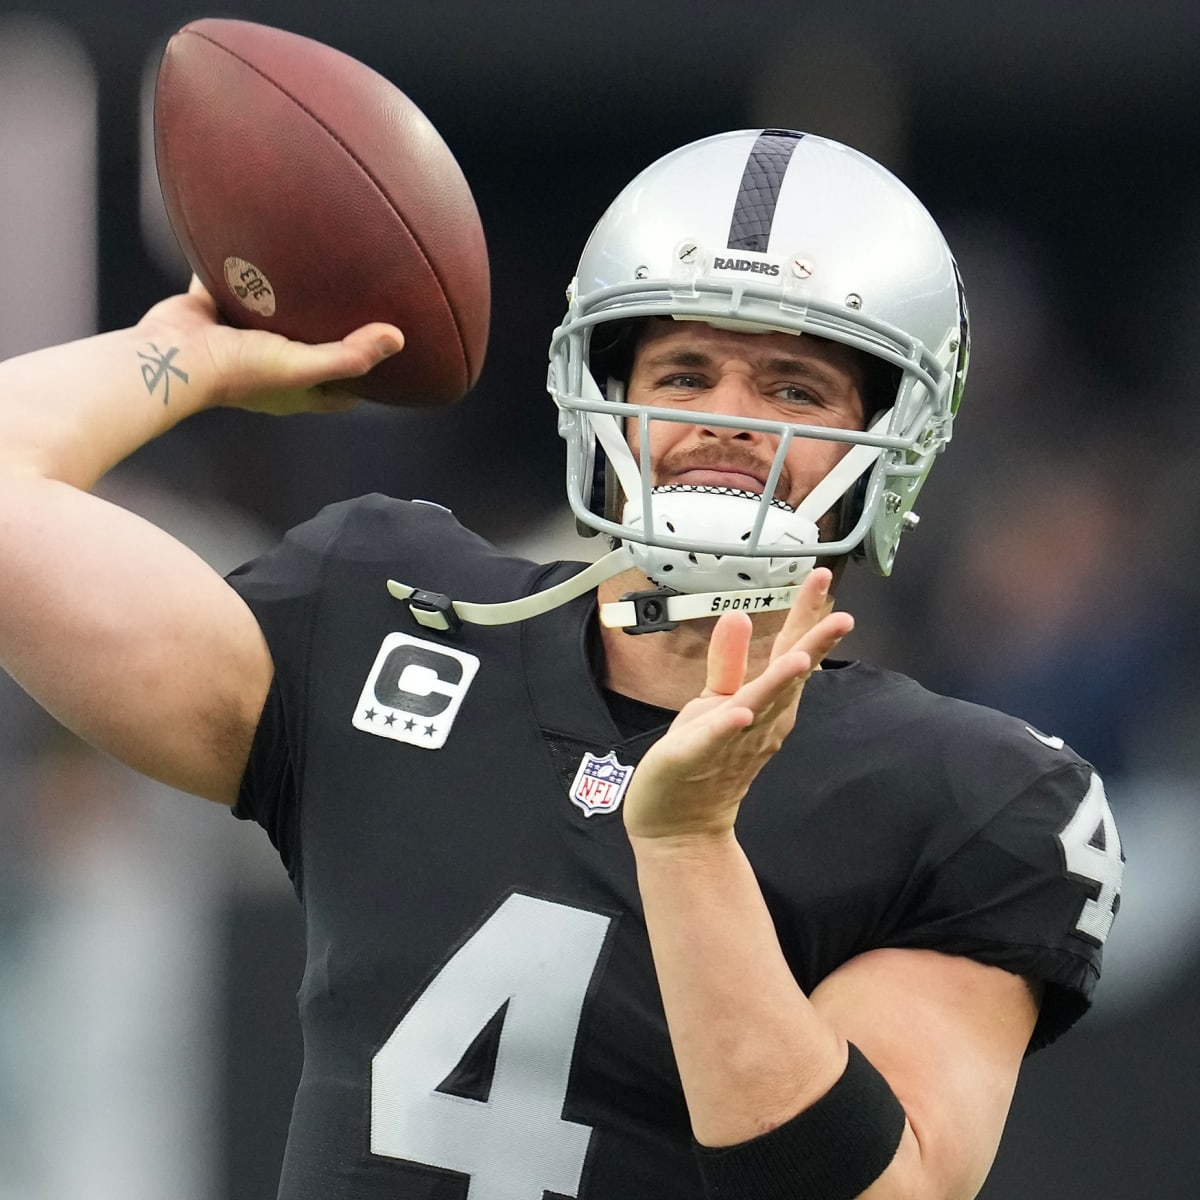 Titans open with visit to Saints, who are counting on Derek Carr as new QB